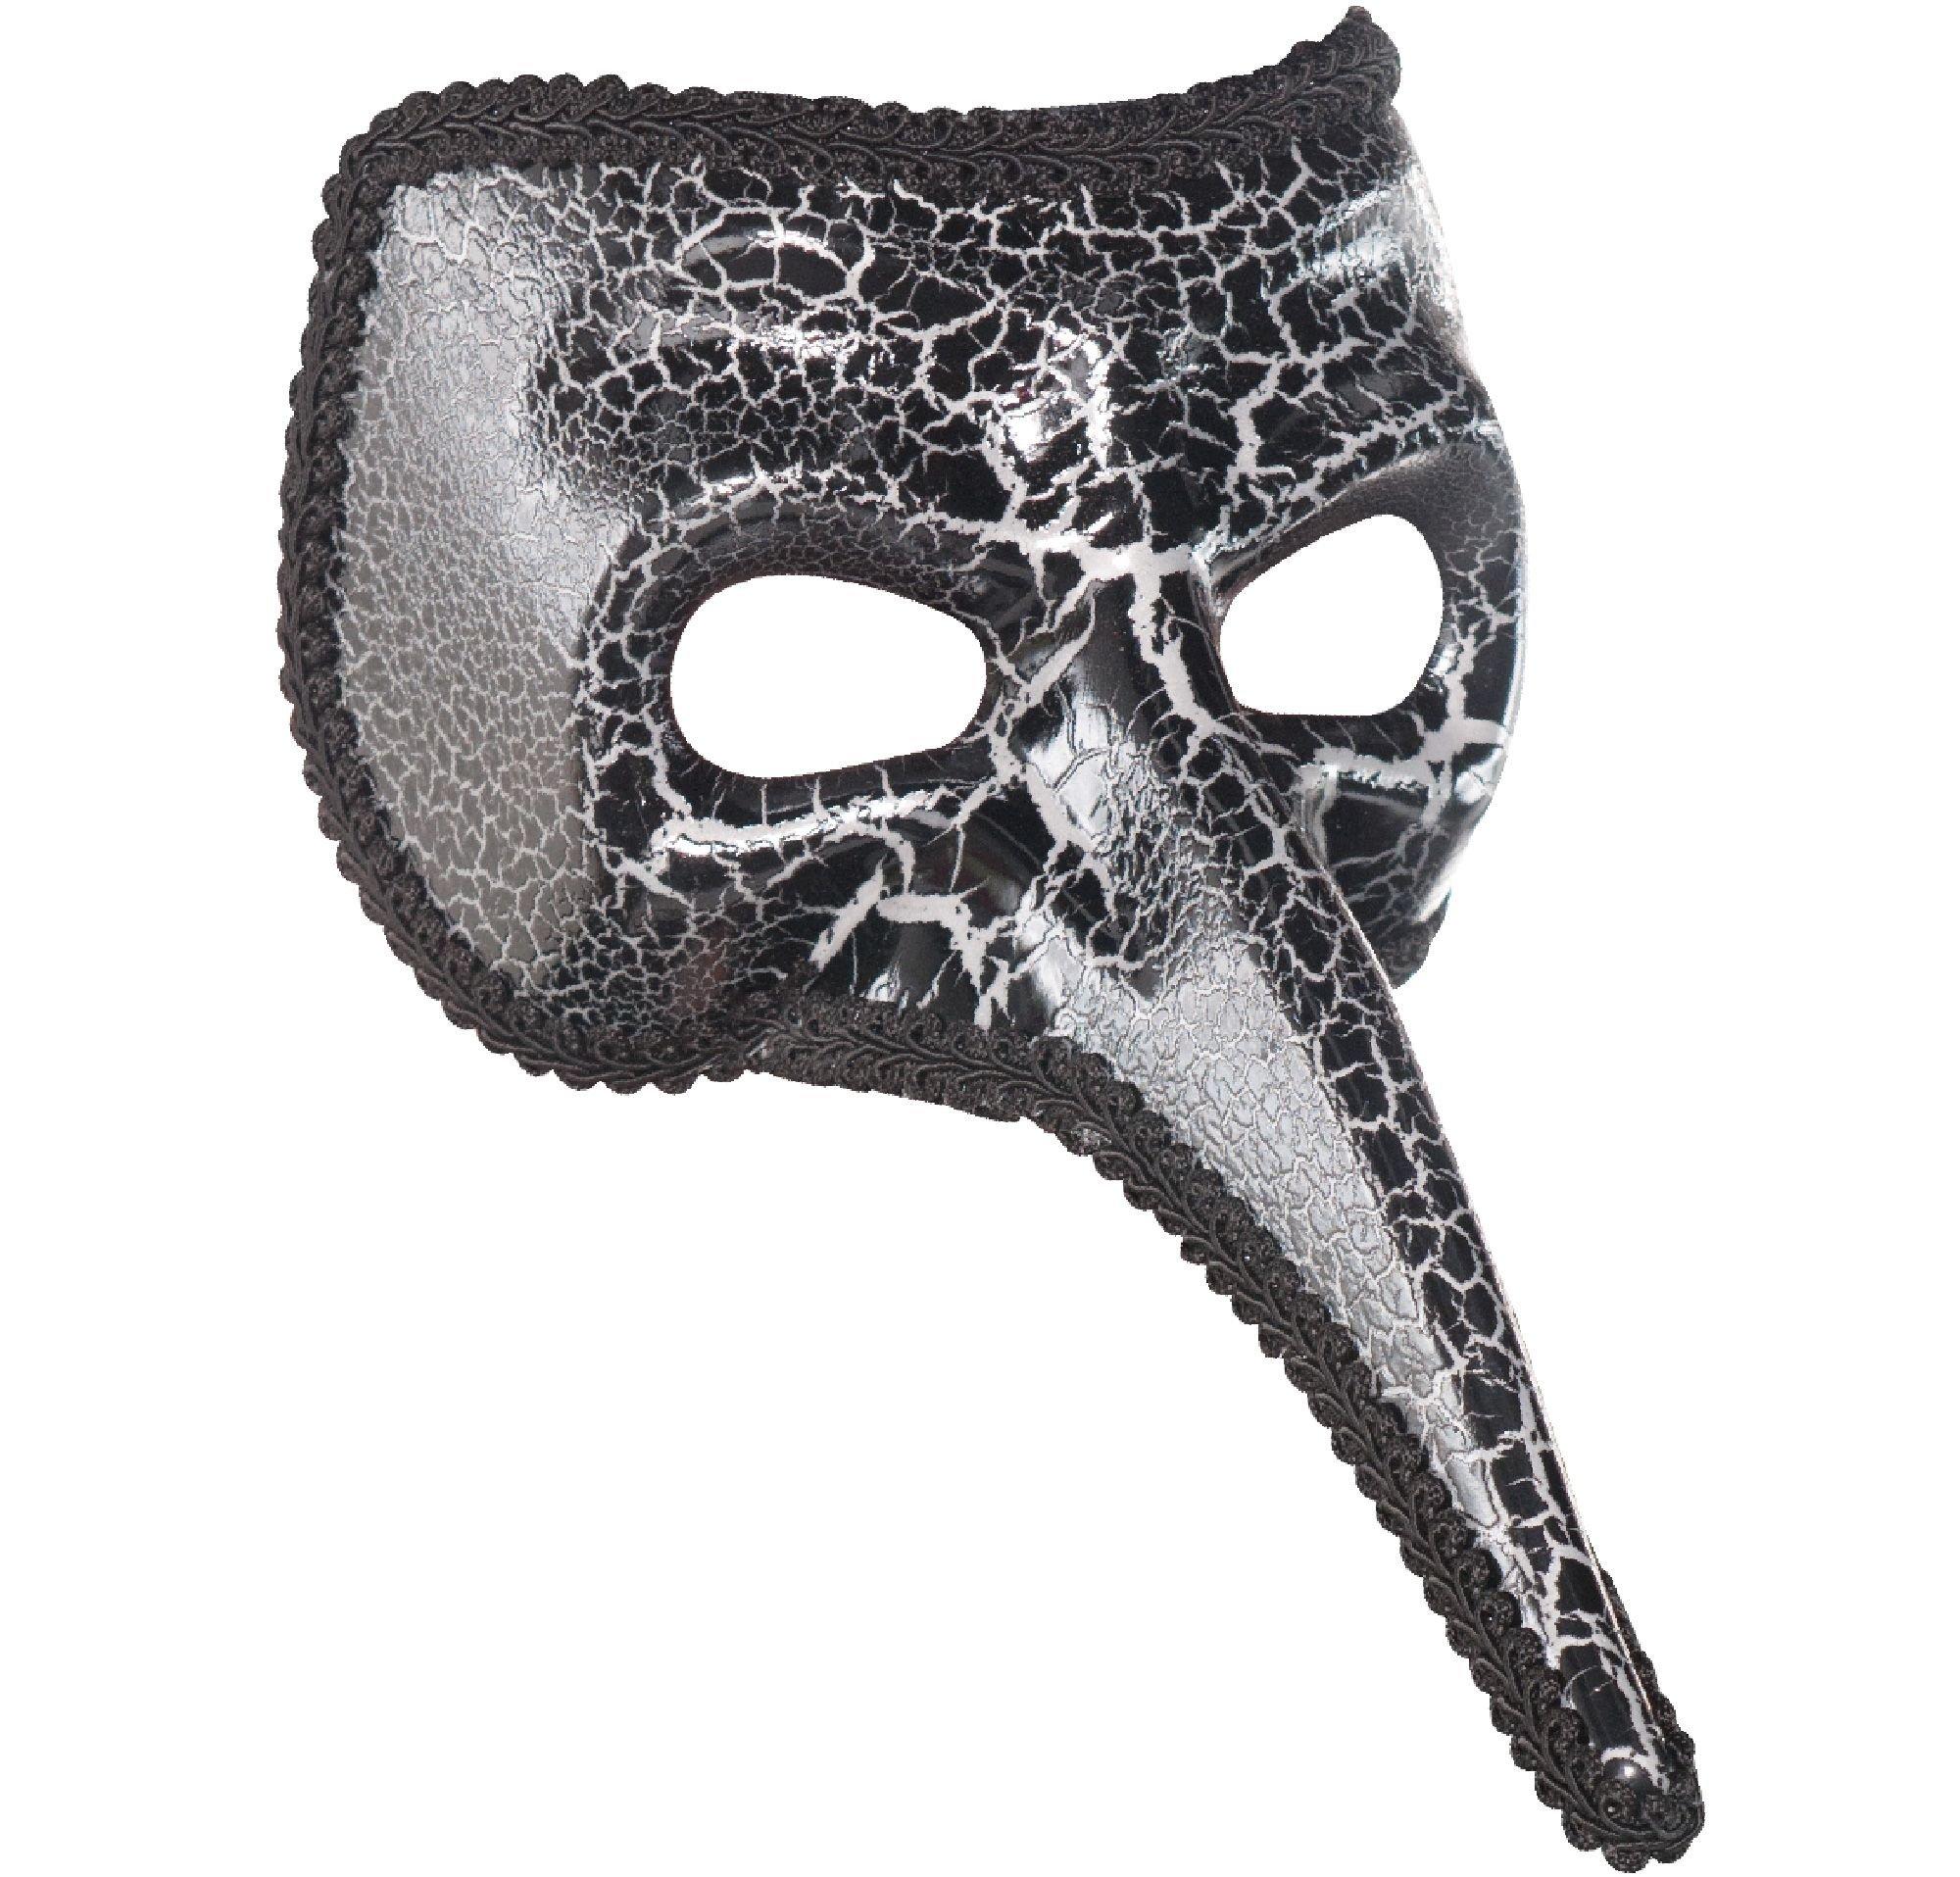 Black Crackle Long Nose Mask 6 1/2in x 5in